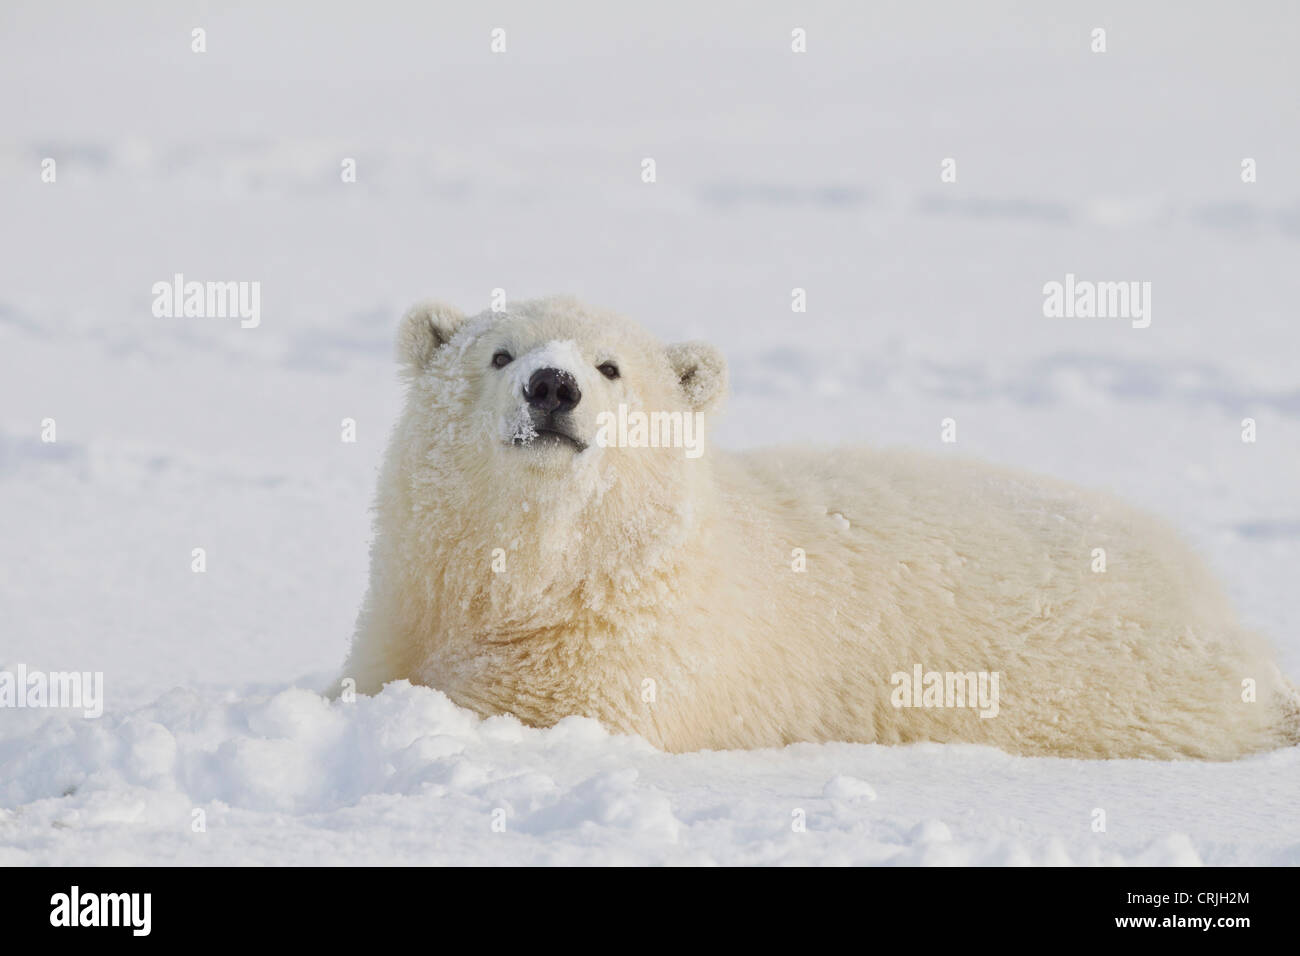 A young polar bear rolls in the snow on the Beaufort Sea coastline, in ANWR, Northern Alaska. Stock Photo